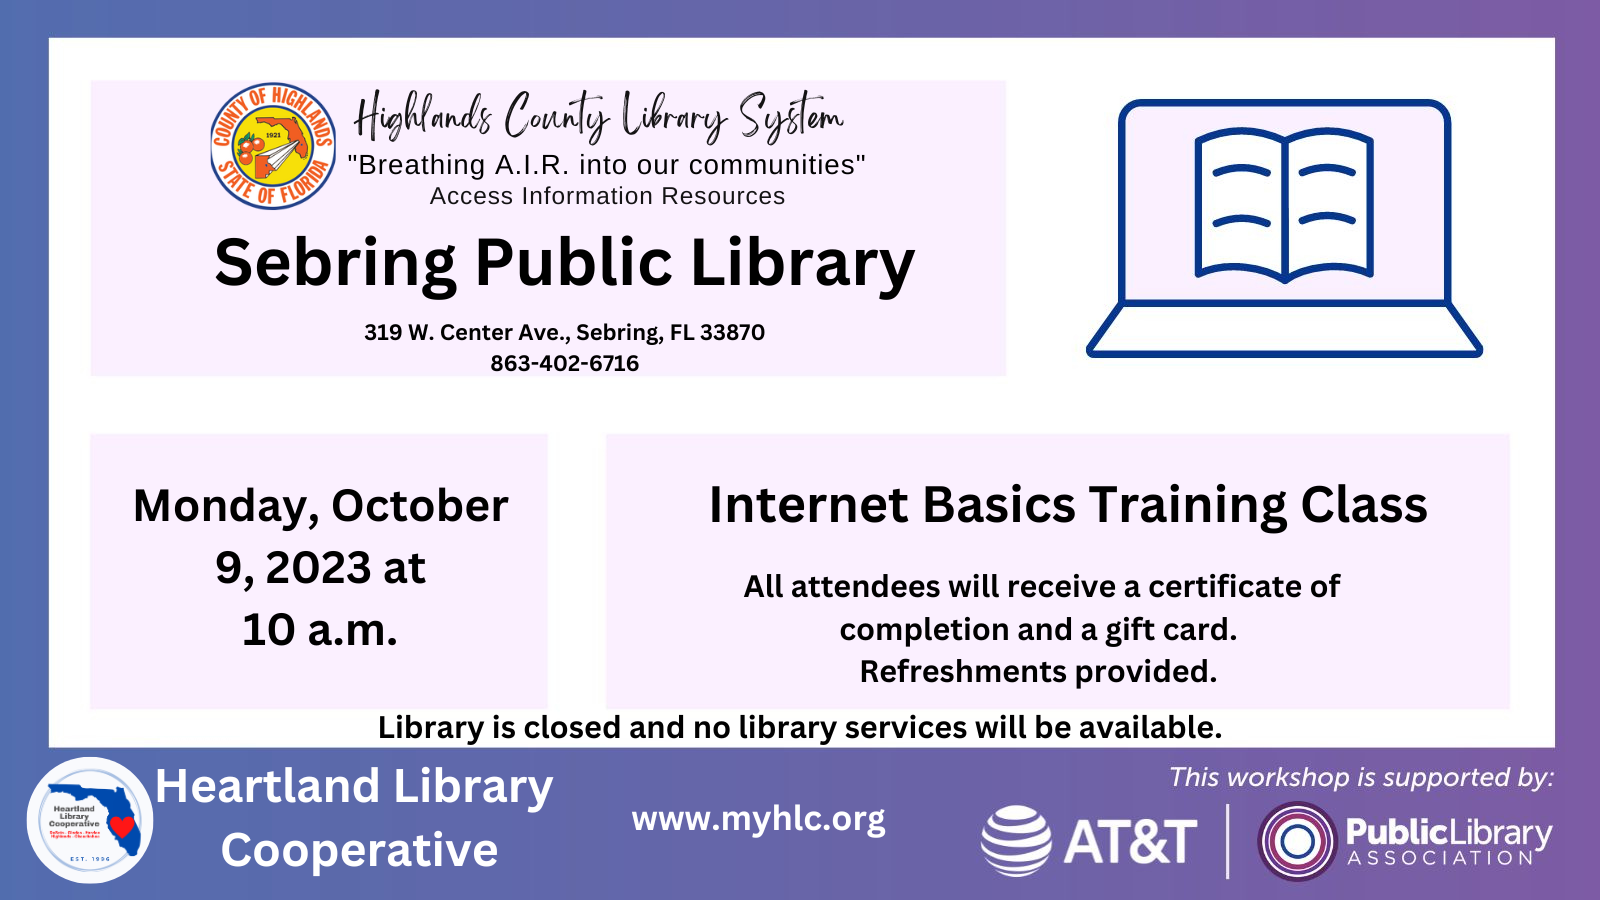 On Monday, October 9, 2023 at 10 a.m., the Sebring Public Library will host an internet basics course.